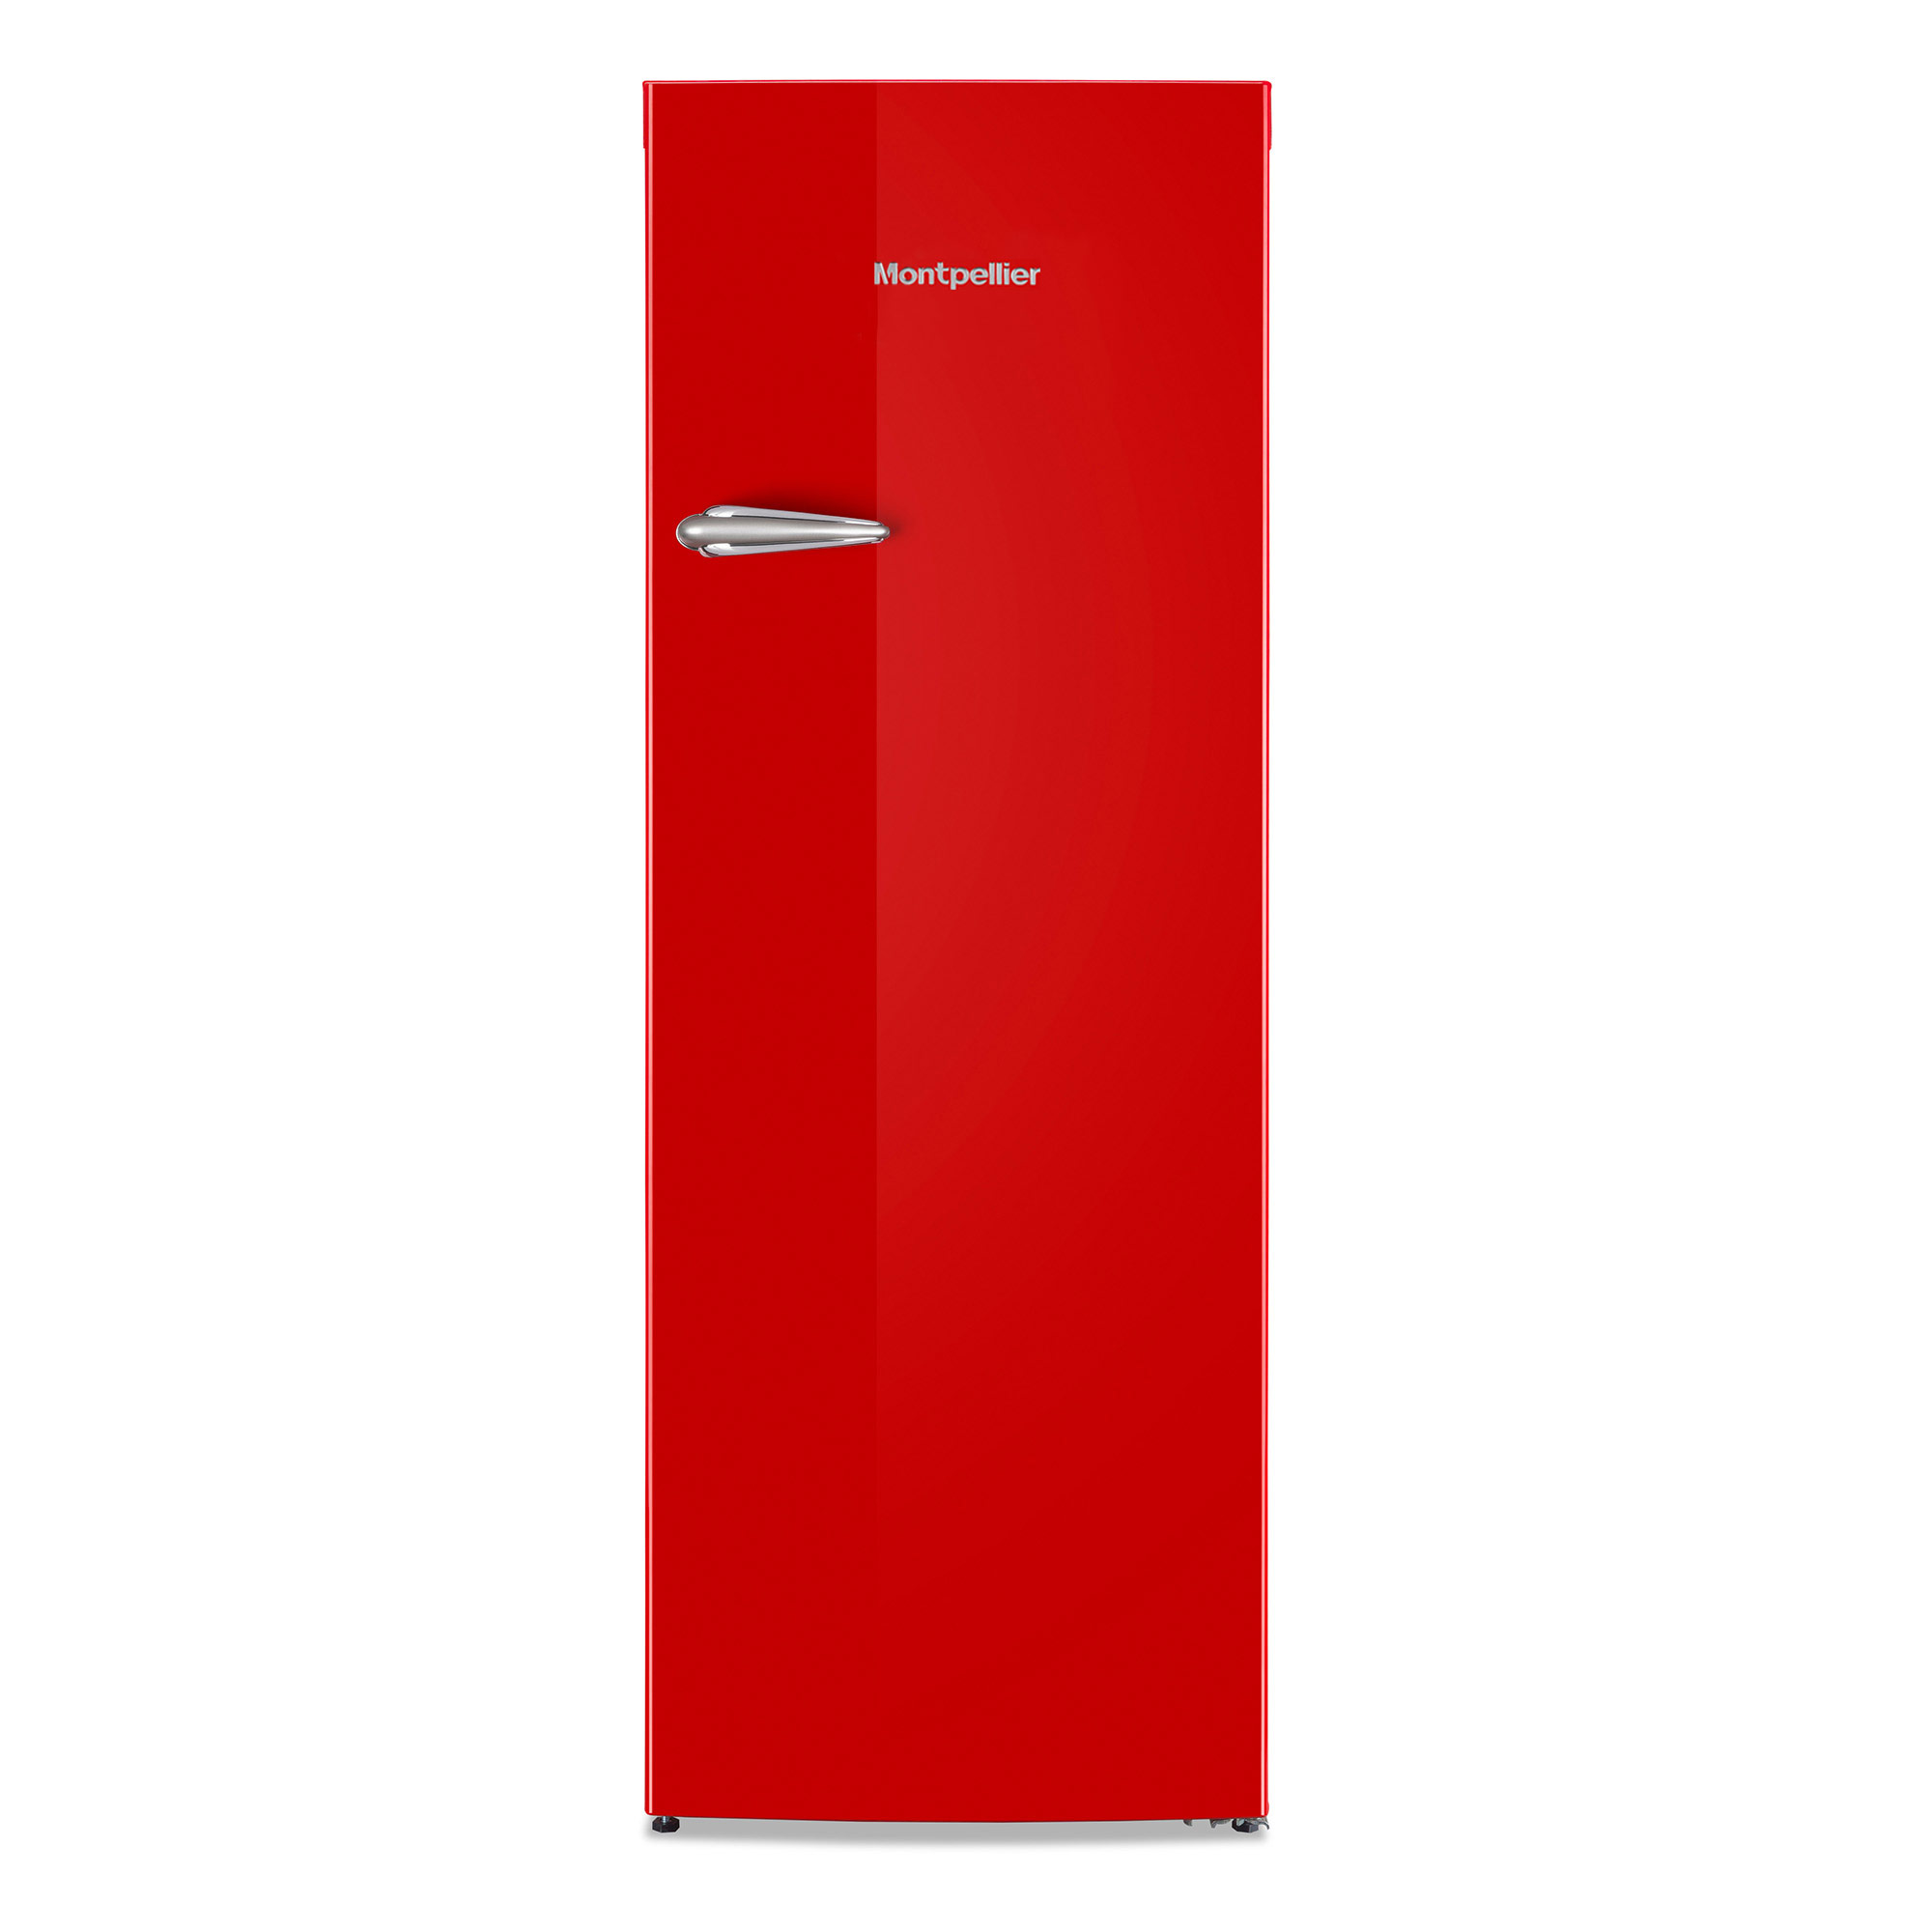  Montpellier MAB341R Retro Fridge with Icebox in Red